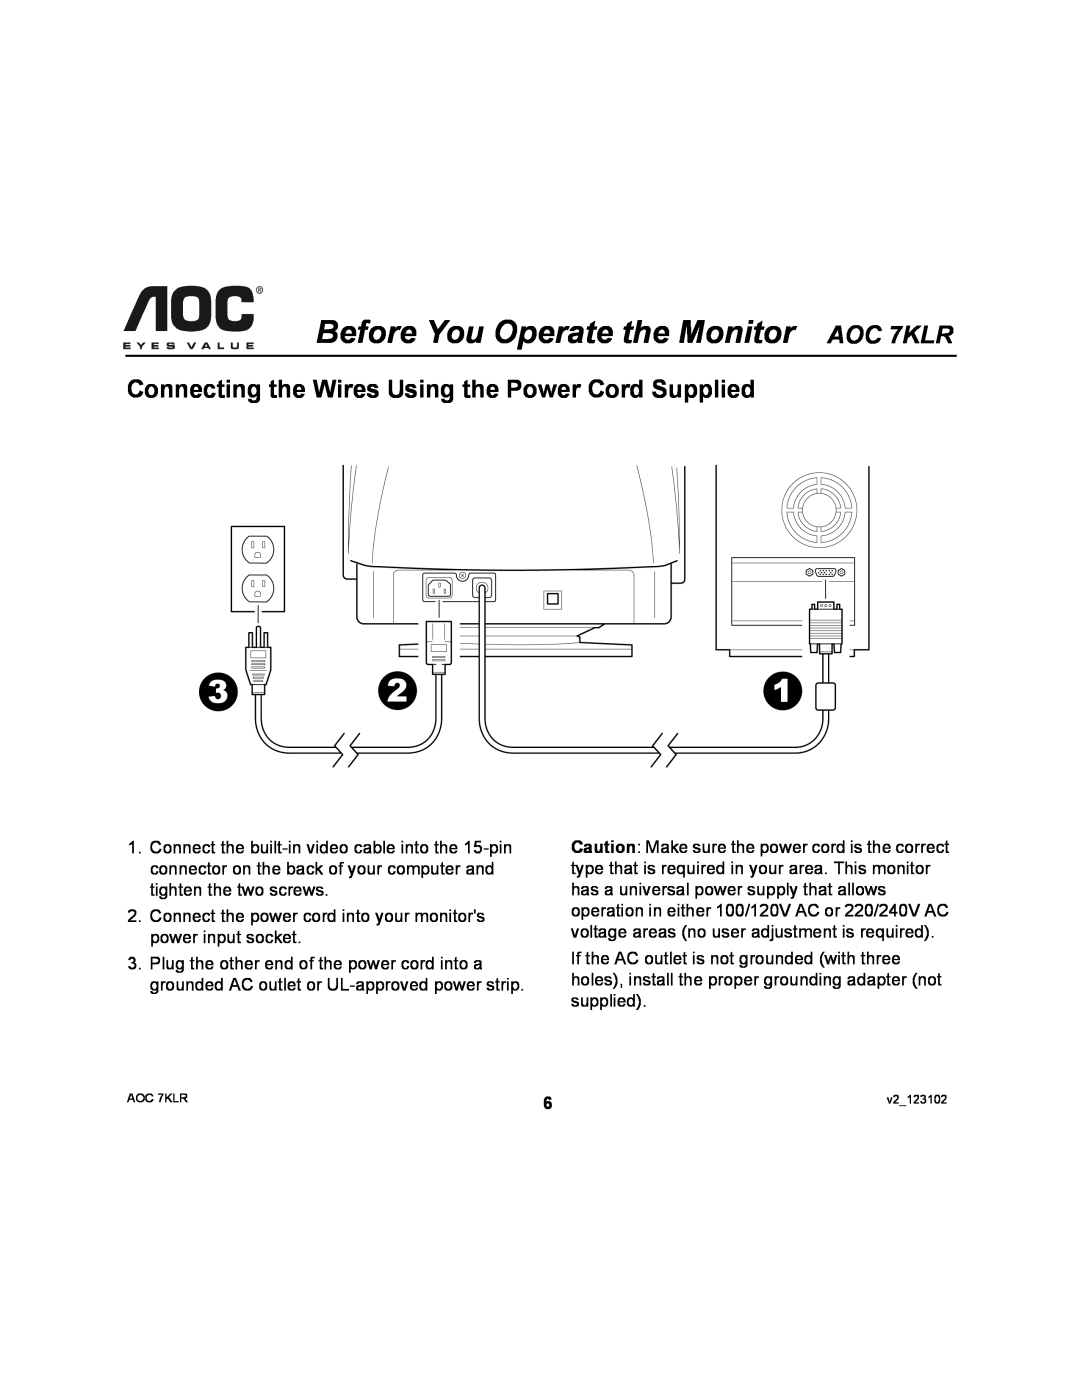 AOC user manual Connecting the Wires Using the Power Cord Supplied, Before You Operate the Monitor AOC 7KLR 